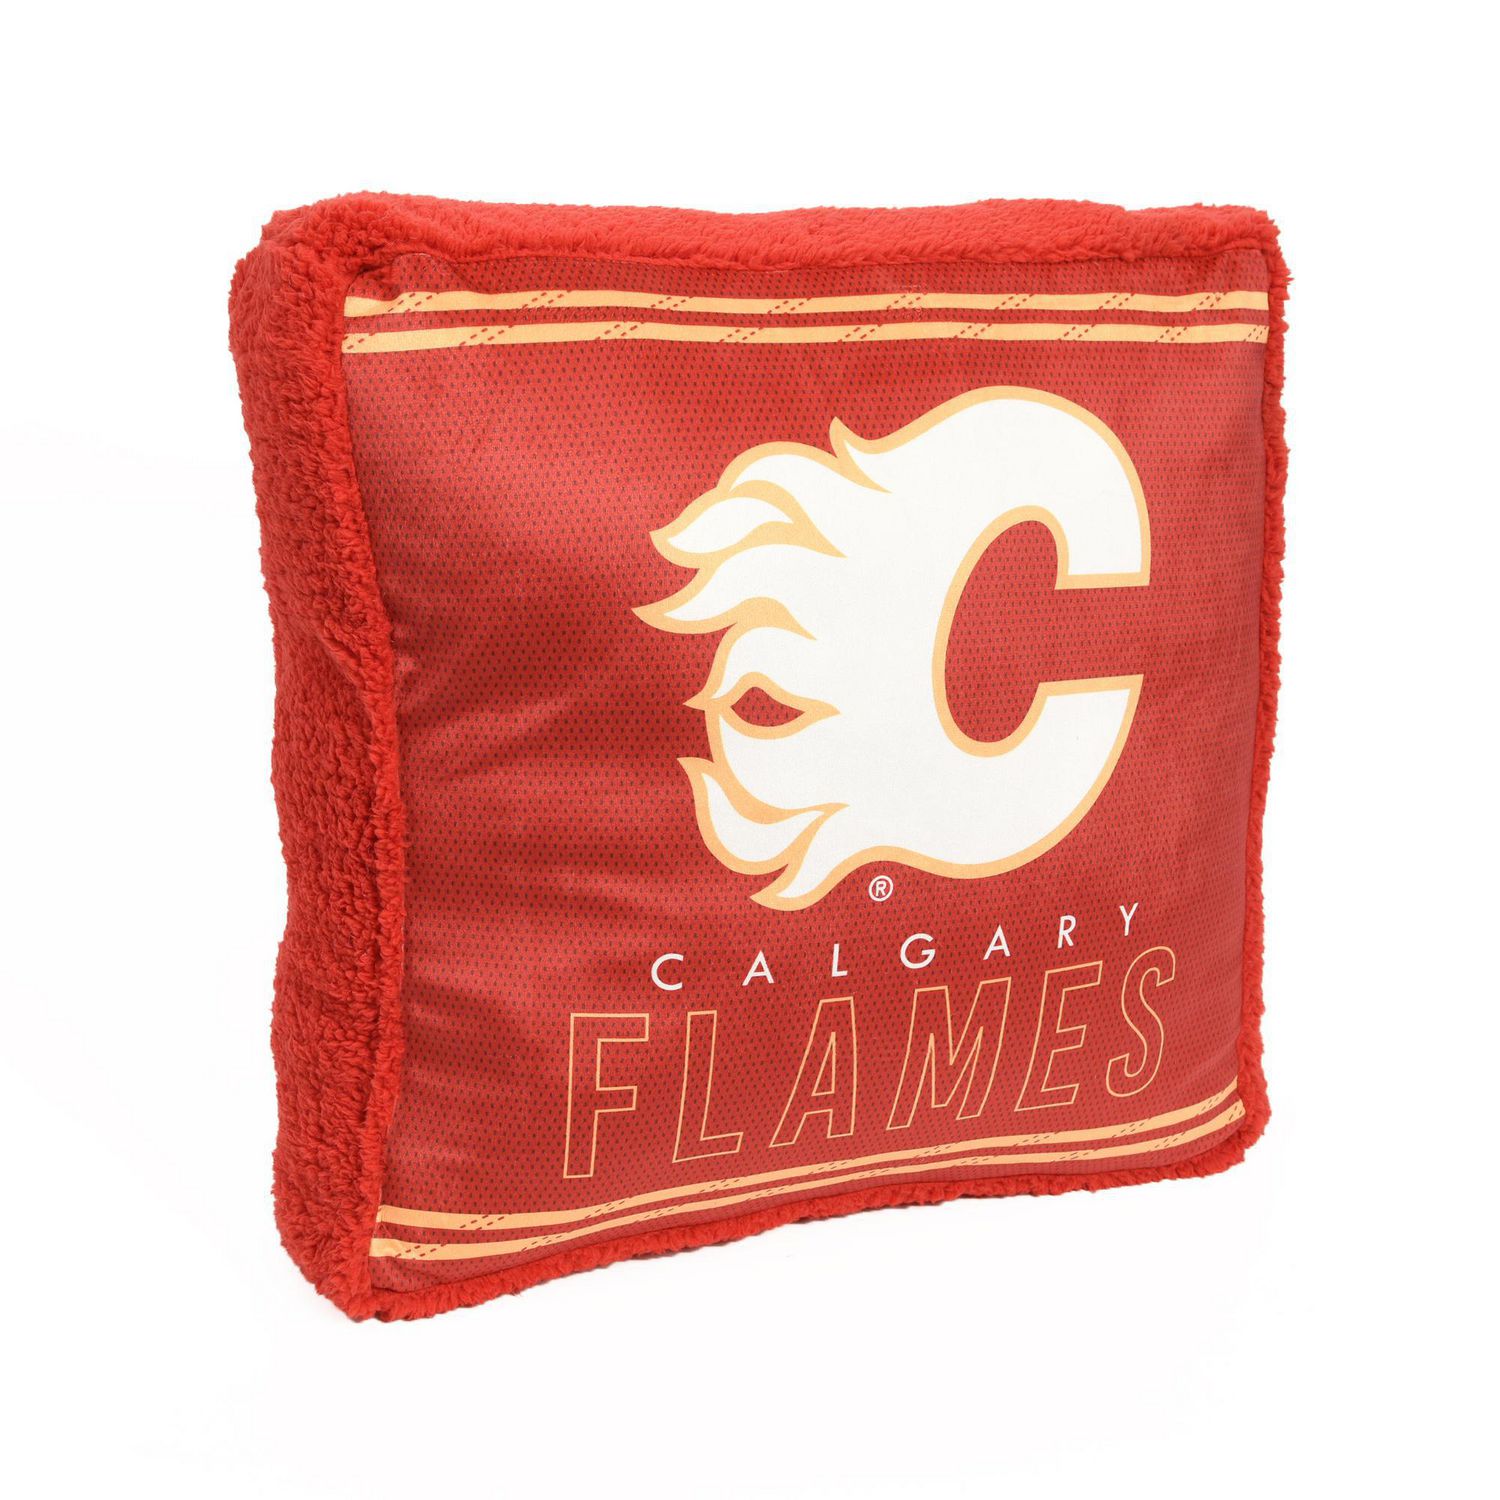 Calgary Flames: New fan? We've got you covered!